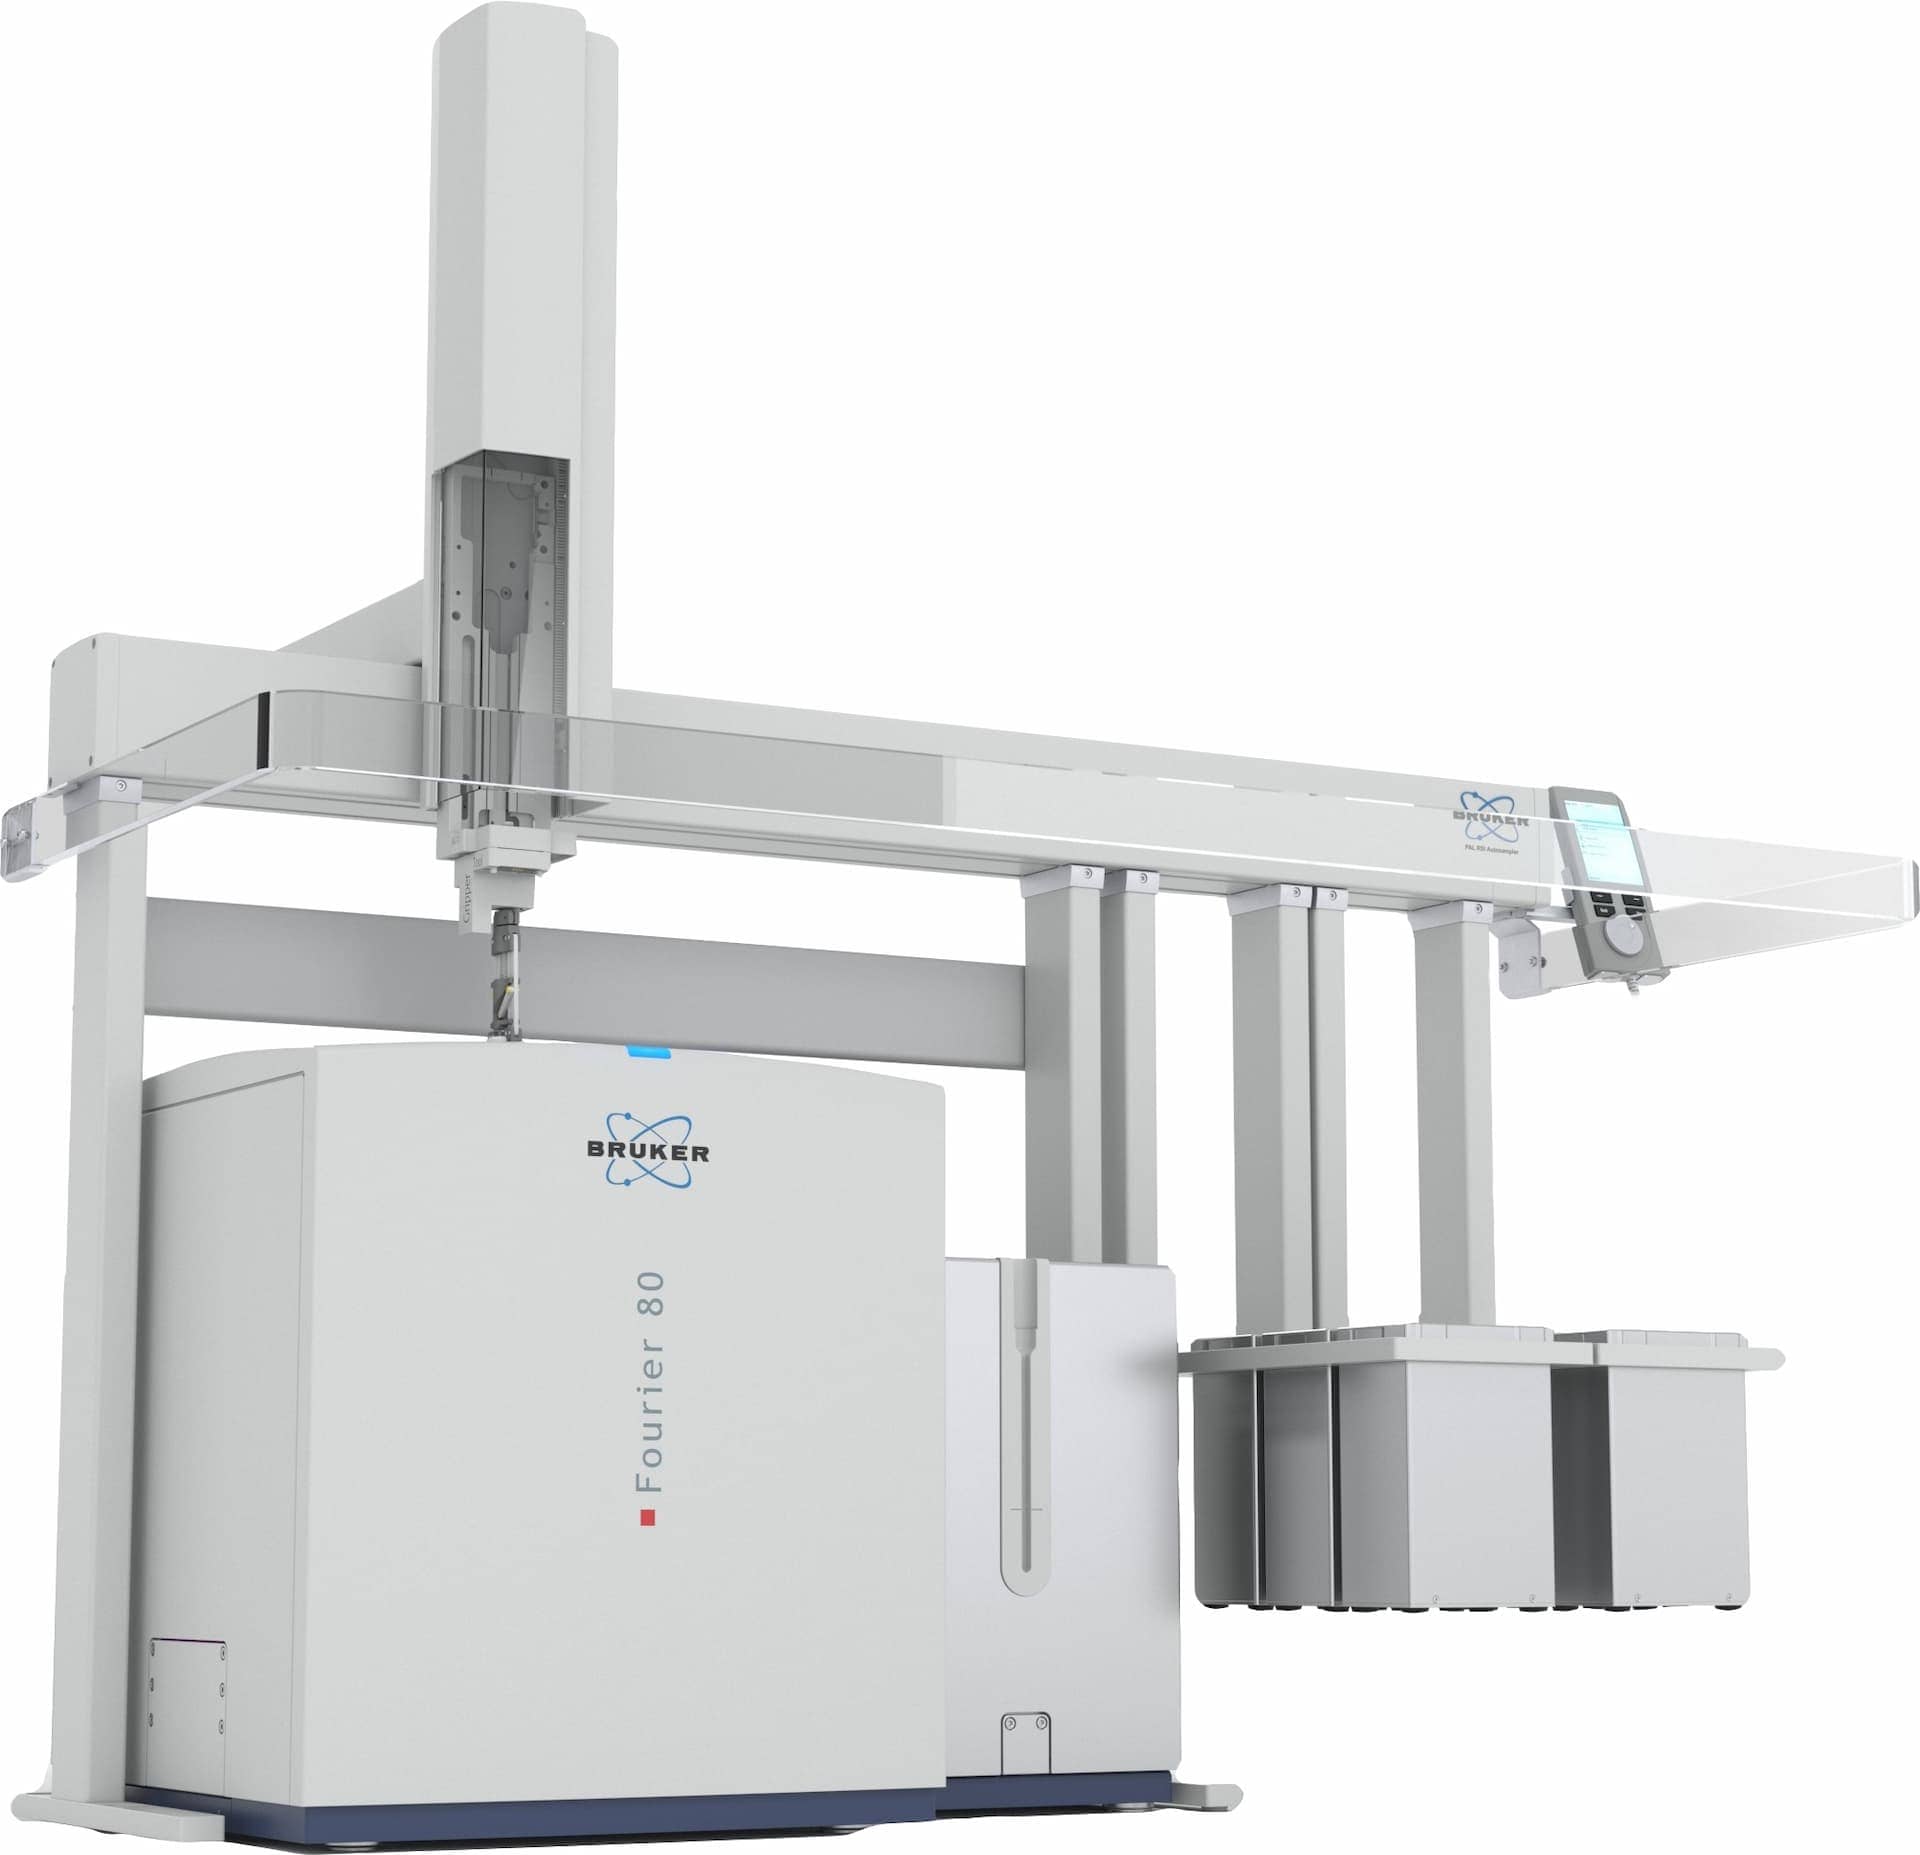 sponsored-bruker-launches-nmr-olive-oilprofiling-solution-for-quality-control-and-authenticity-verification-olive-oil-times